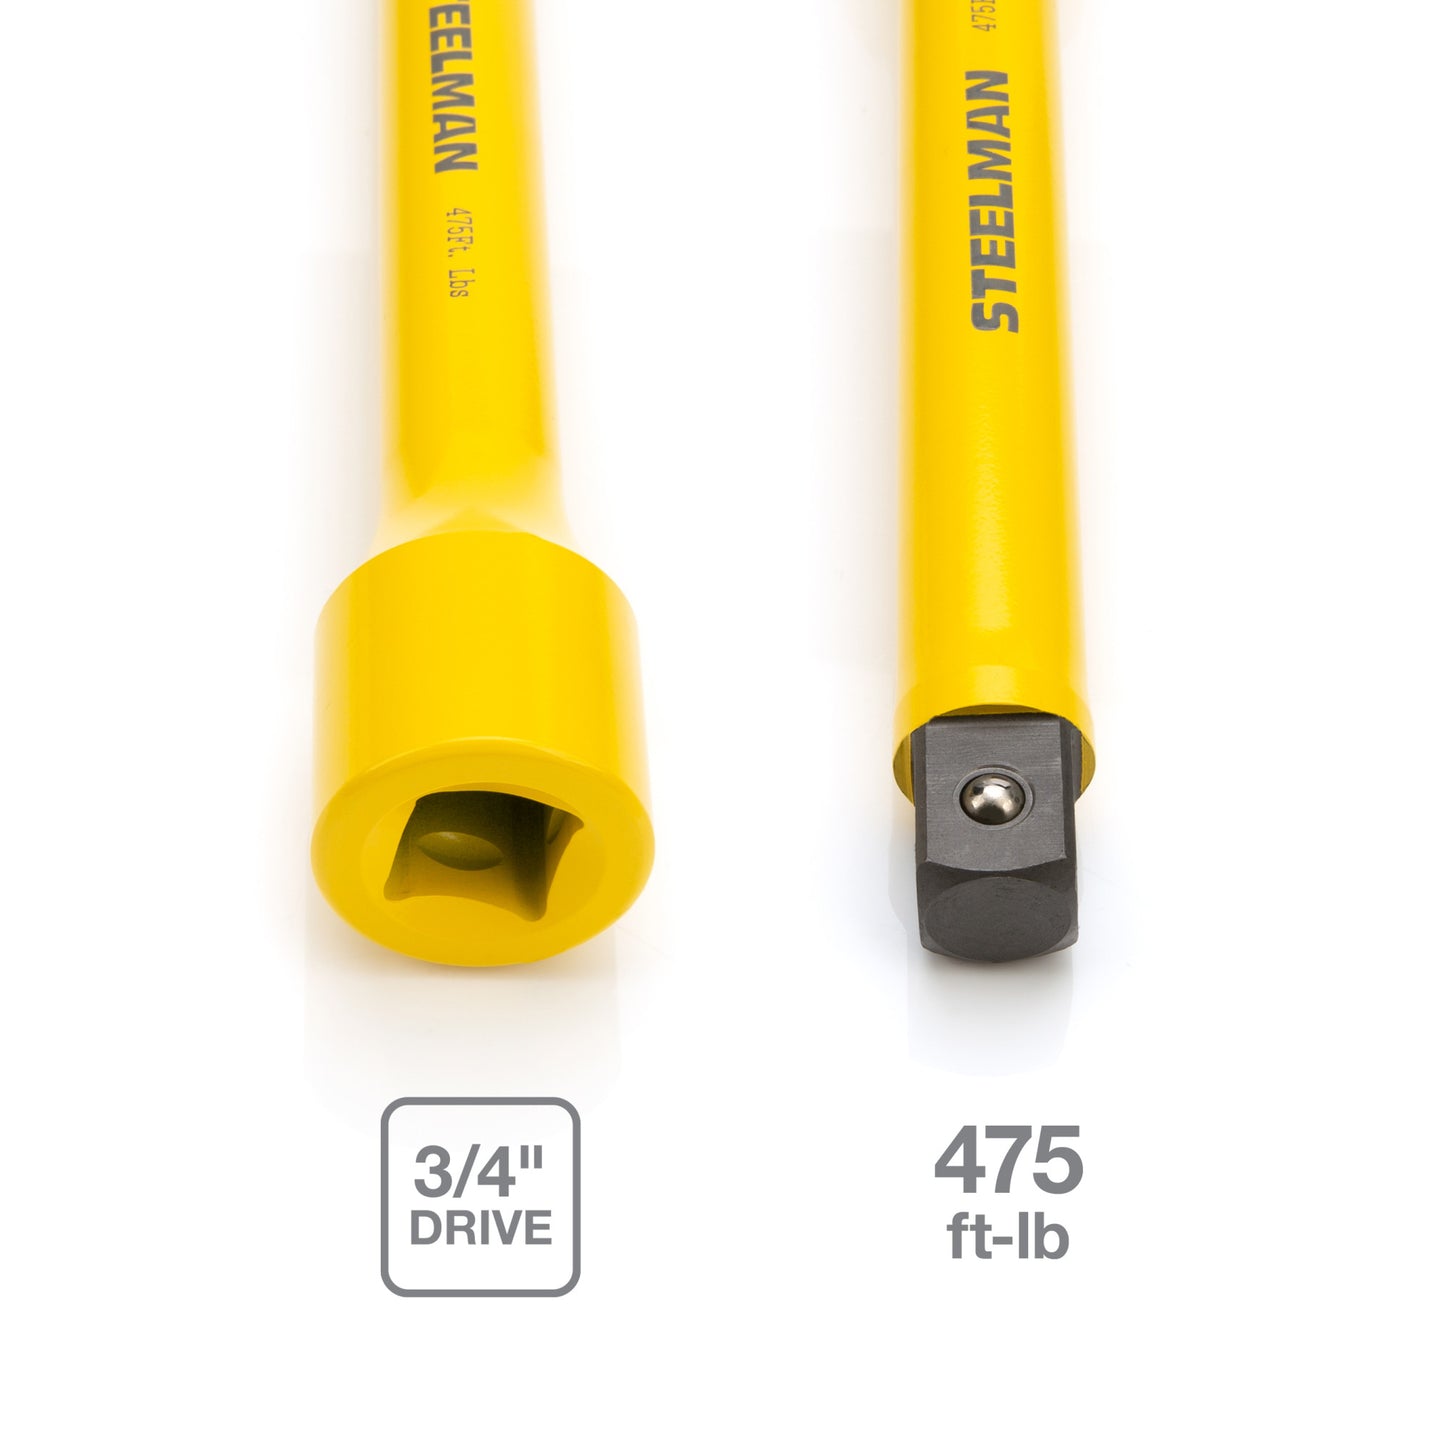 3/4-inch Drive 475 ft-lb Torque Extension- Yellow